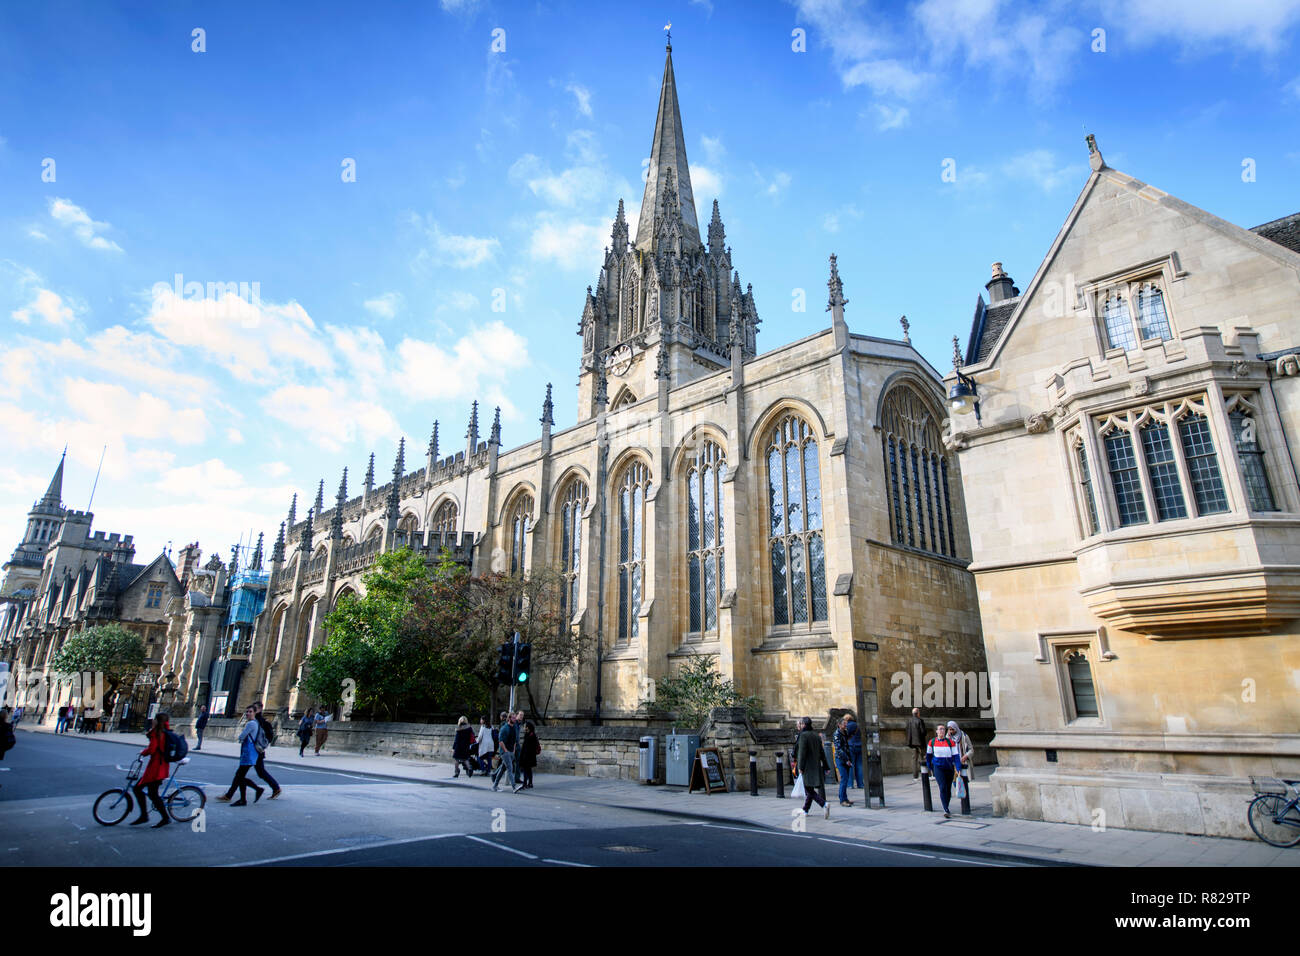 The University Church of St Mary the Virgin in Oxford, UK Stock Photo